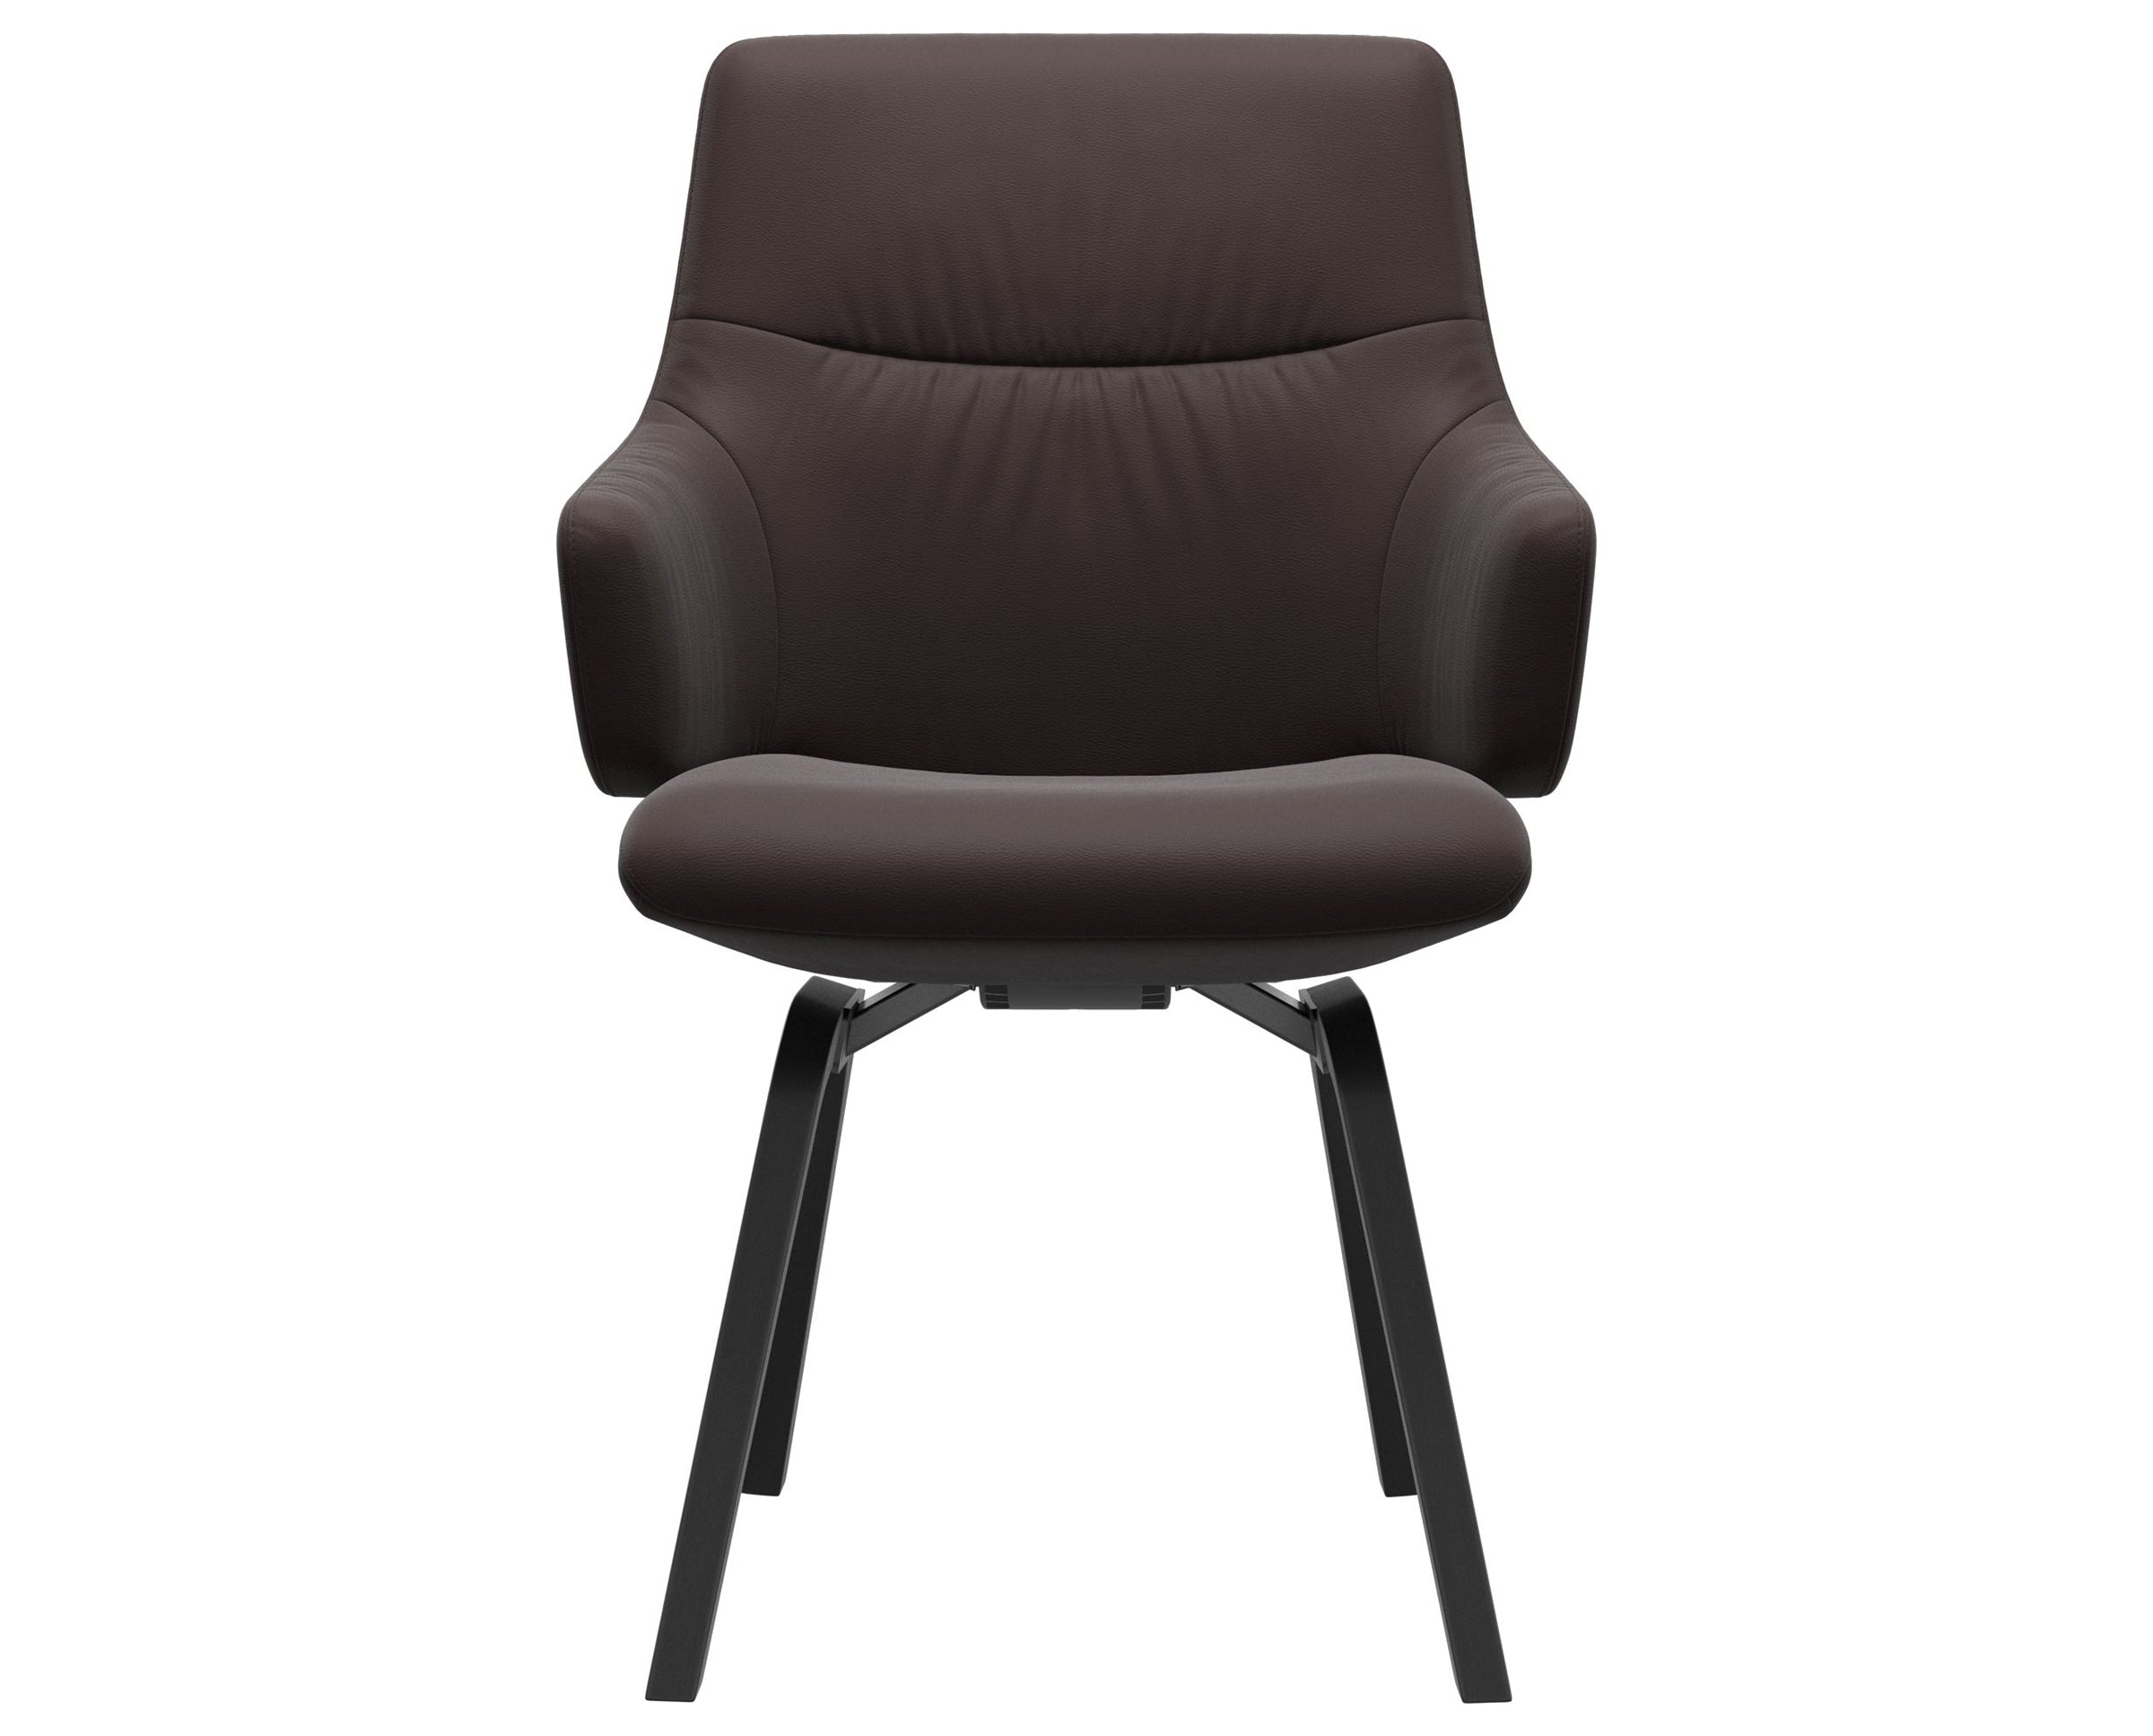 Paloma Leather Chocolate and Black Base | Stressless Mint Low Back D200 Dining Chair w/Arms | Valley Ridge Furniture